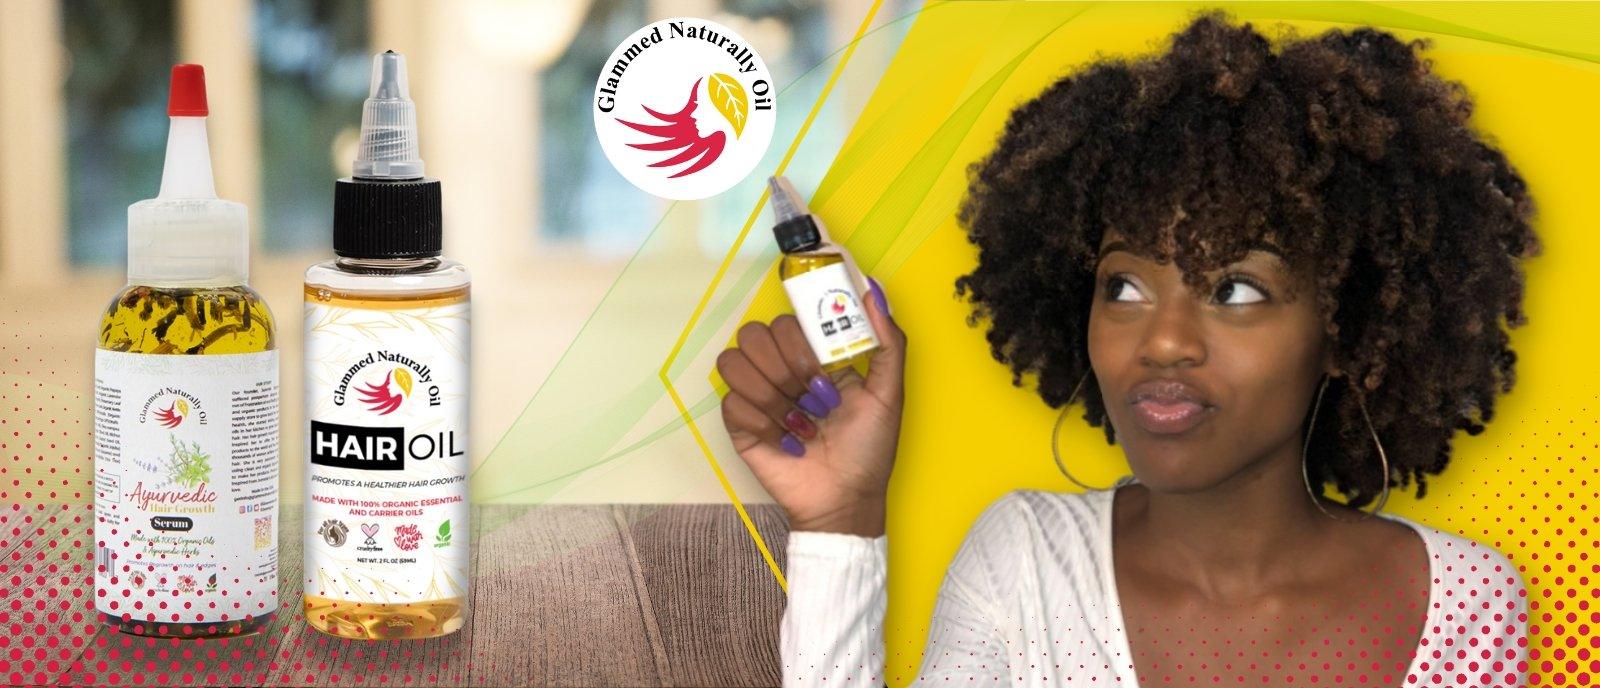 Sealing and Oiling Your Natural Hair - GlammedNaturallyOil